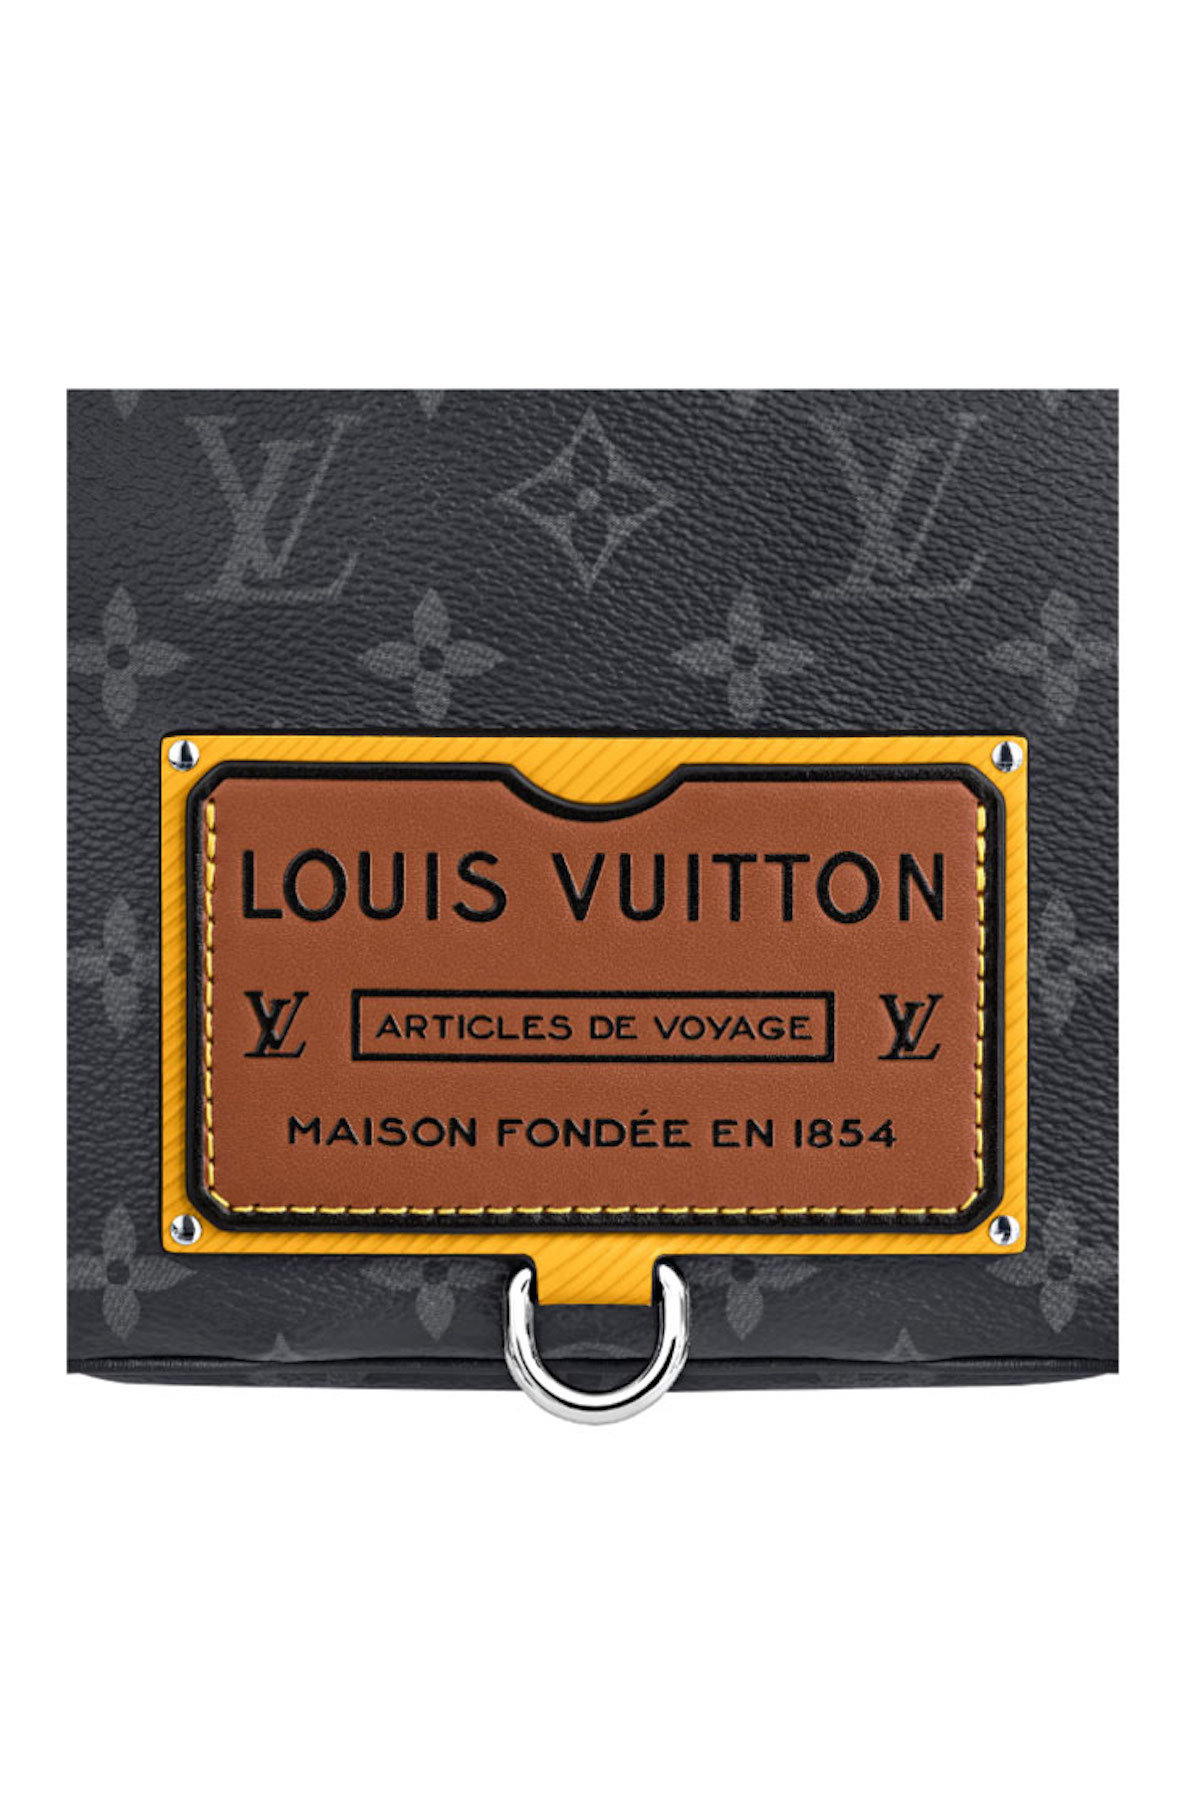 Gaston Louis Vuitton. 1911. Greeting card. With best wi…